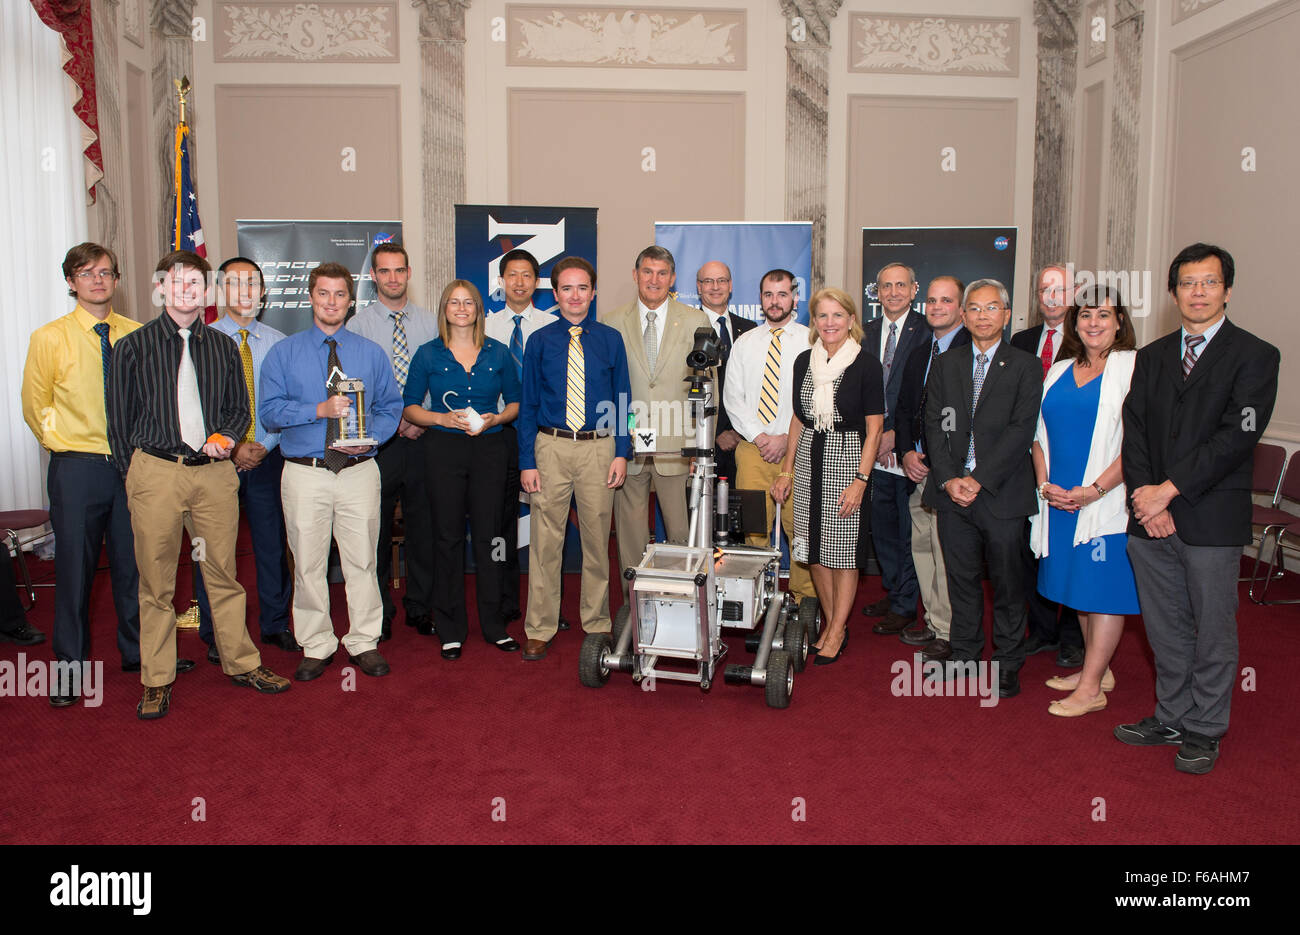 The winners of the 2015 Sample Return Robot Challenge, the Mountaineers Team, pose for a photo with Senator Joe Manchin (D-W.Va); Senator Shelley Moore Capito (R-W.Va); Steve Jurczyk, associate administrator, Space Technology, NASA;  Dr. David A. Wyrick, associate dean of West Virginia University's Statler College of Engineering and Mineral Resources; Dr. Yu Gu, Assistant Professor, West Virginia University; and other NASA and West Virginia University staff before providing a demonstration of their robot on Monday, Sept. 21, 2015 at the Russell Senate Office Building in Washington, DC. The Mou Stock Photo